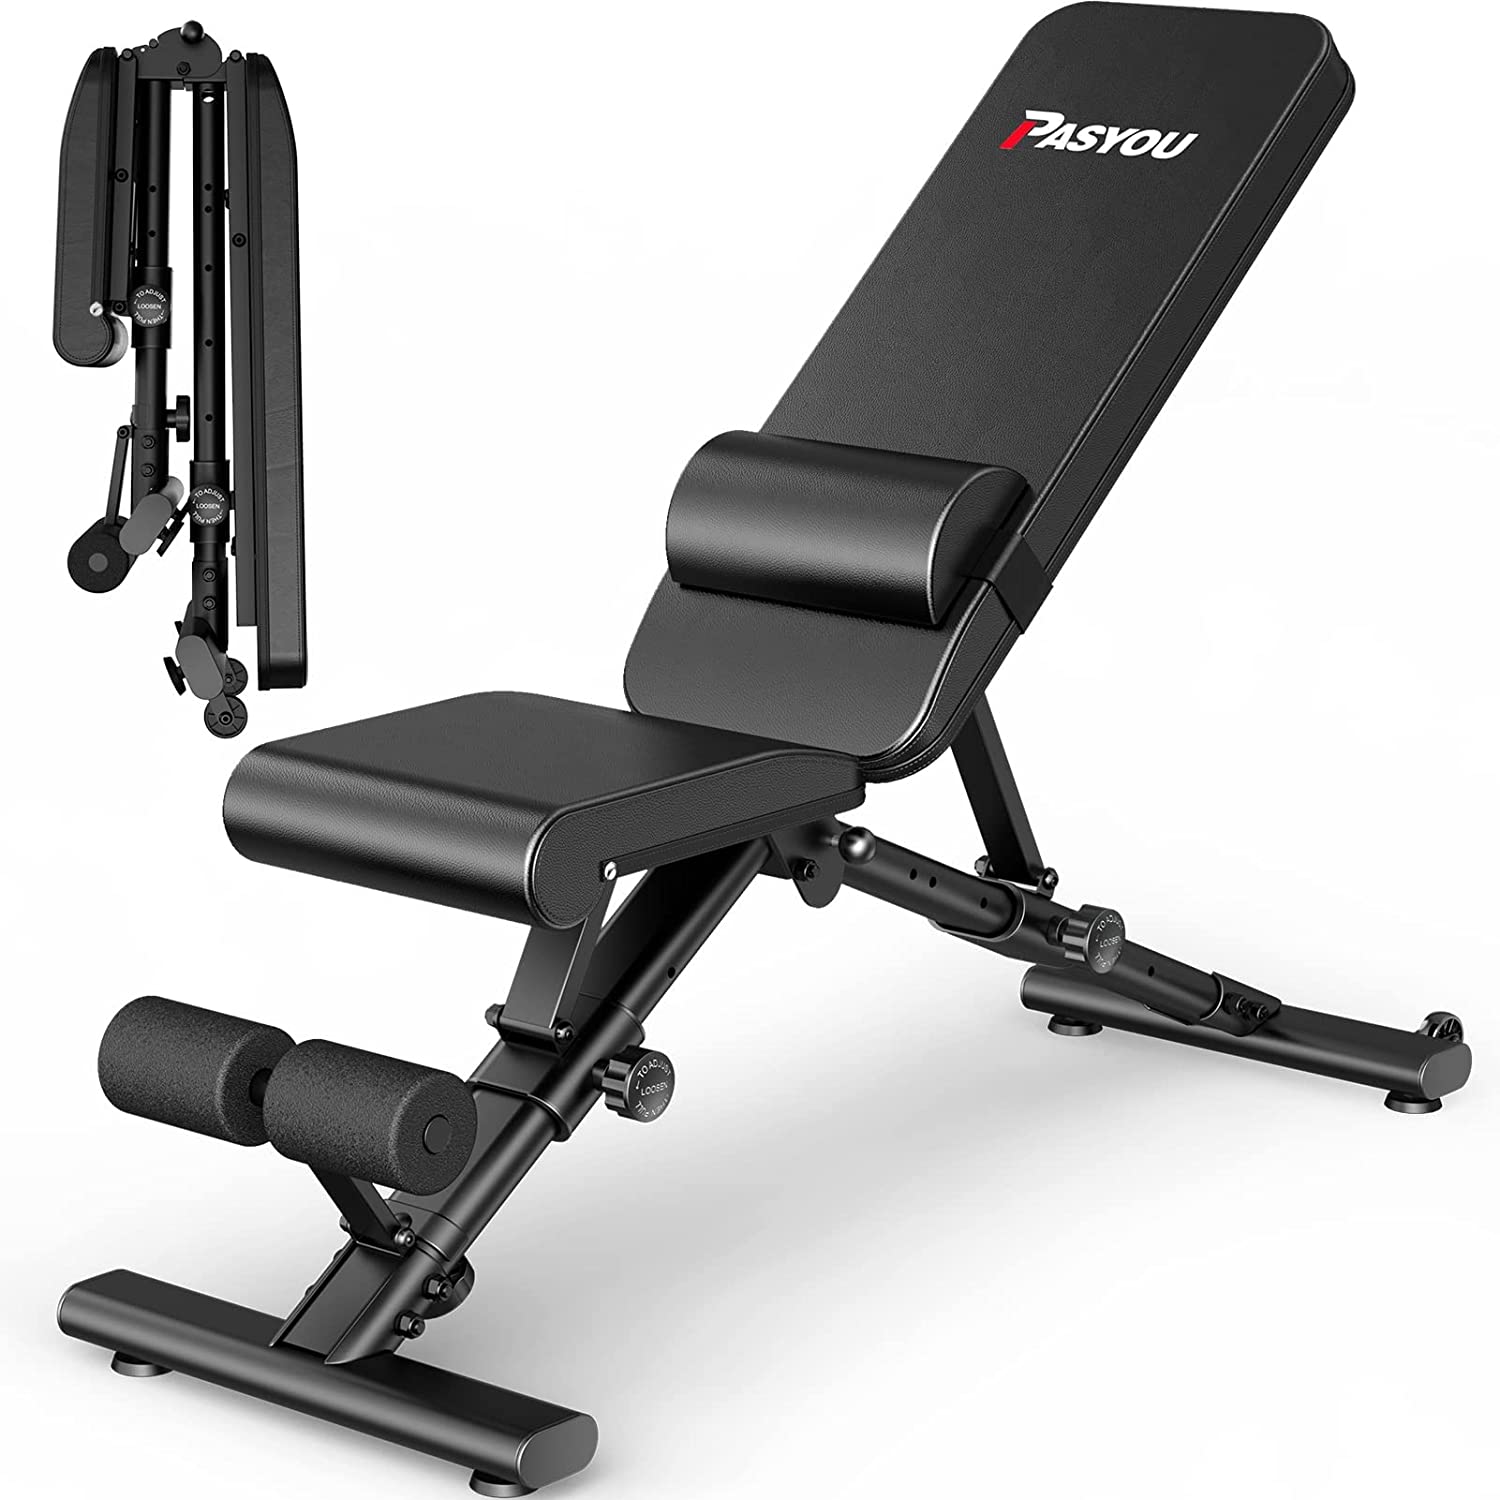 Foldable Incline Decline Workout Bench for Home Gym with A Removable Lumbar Support PA500-Trainnox